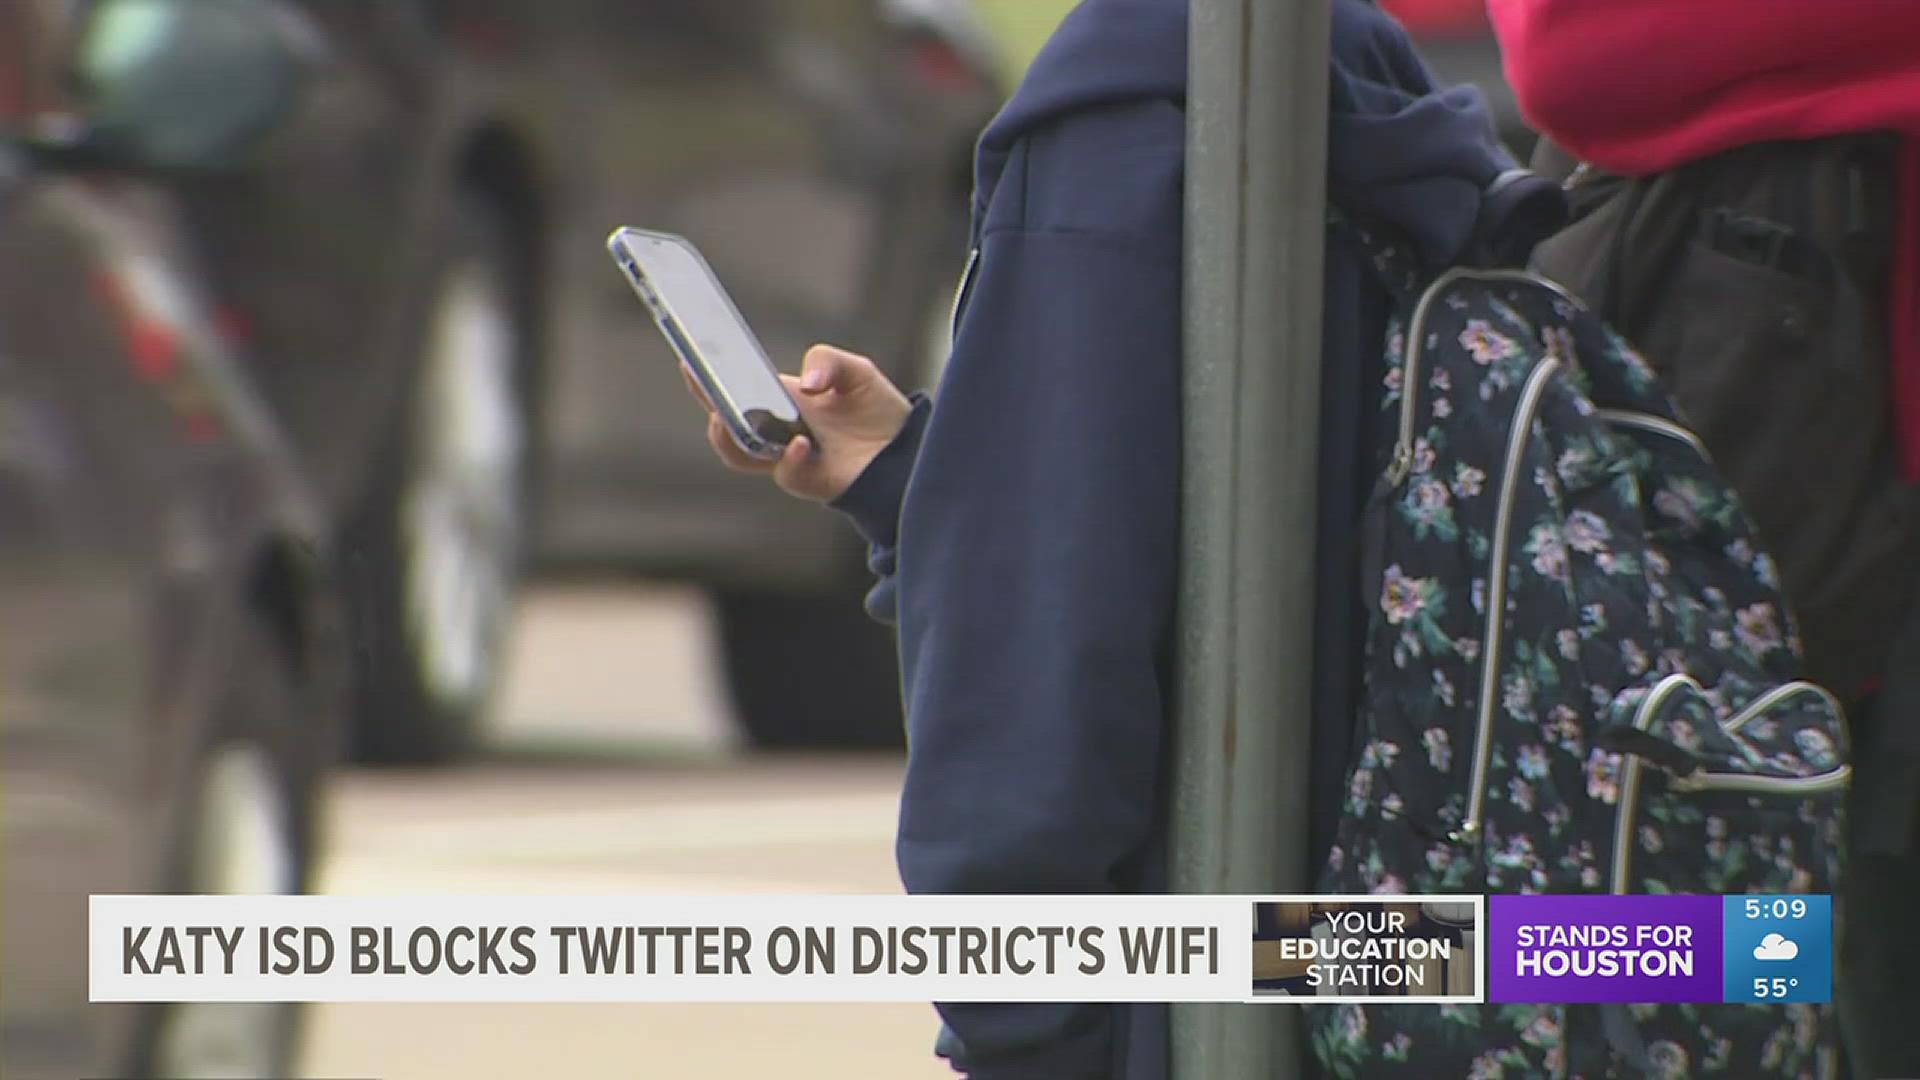 This change comes after the district said students were able to access inappropriate websites through Twitter.